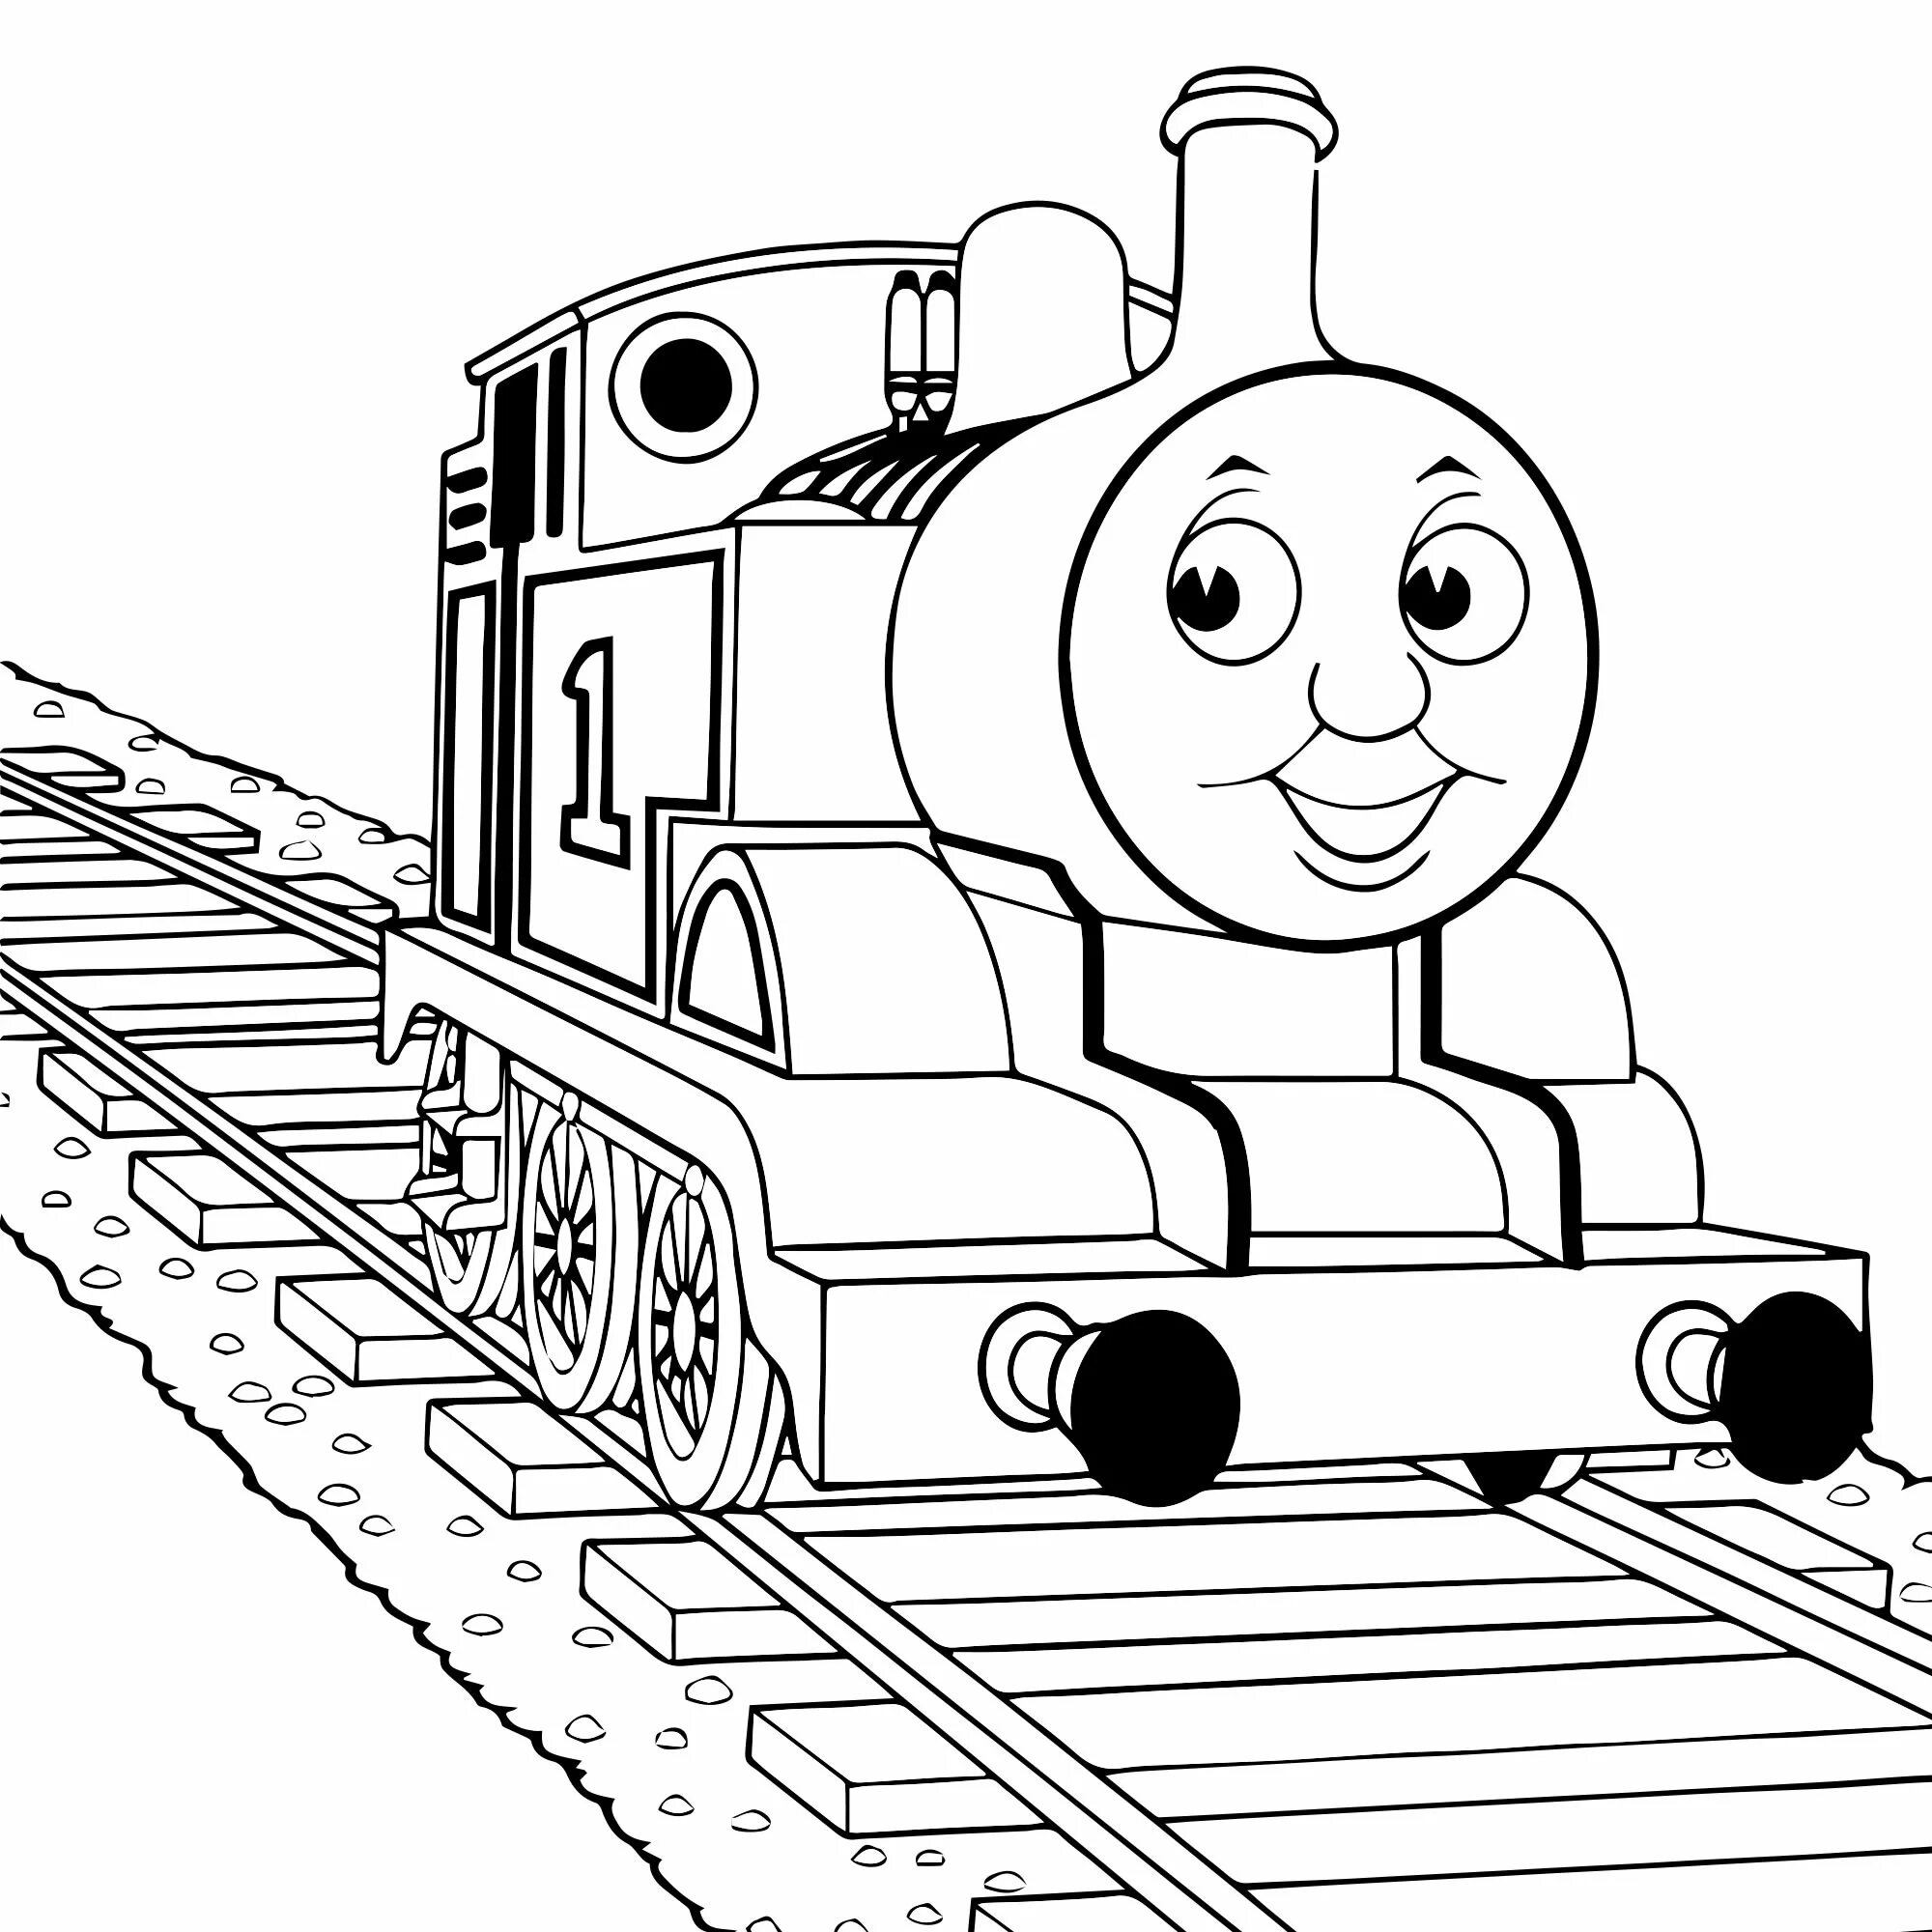 Animated thomas spider coloring page